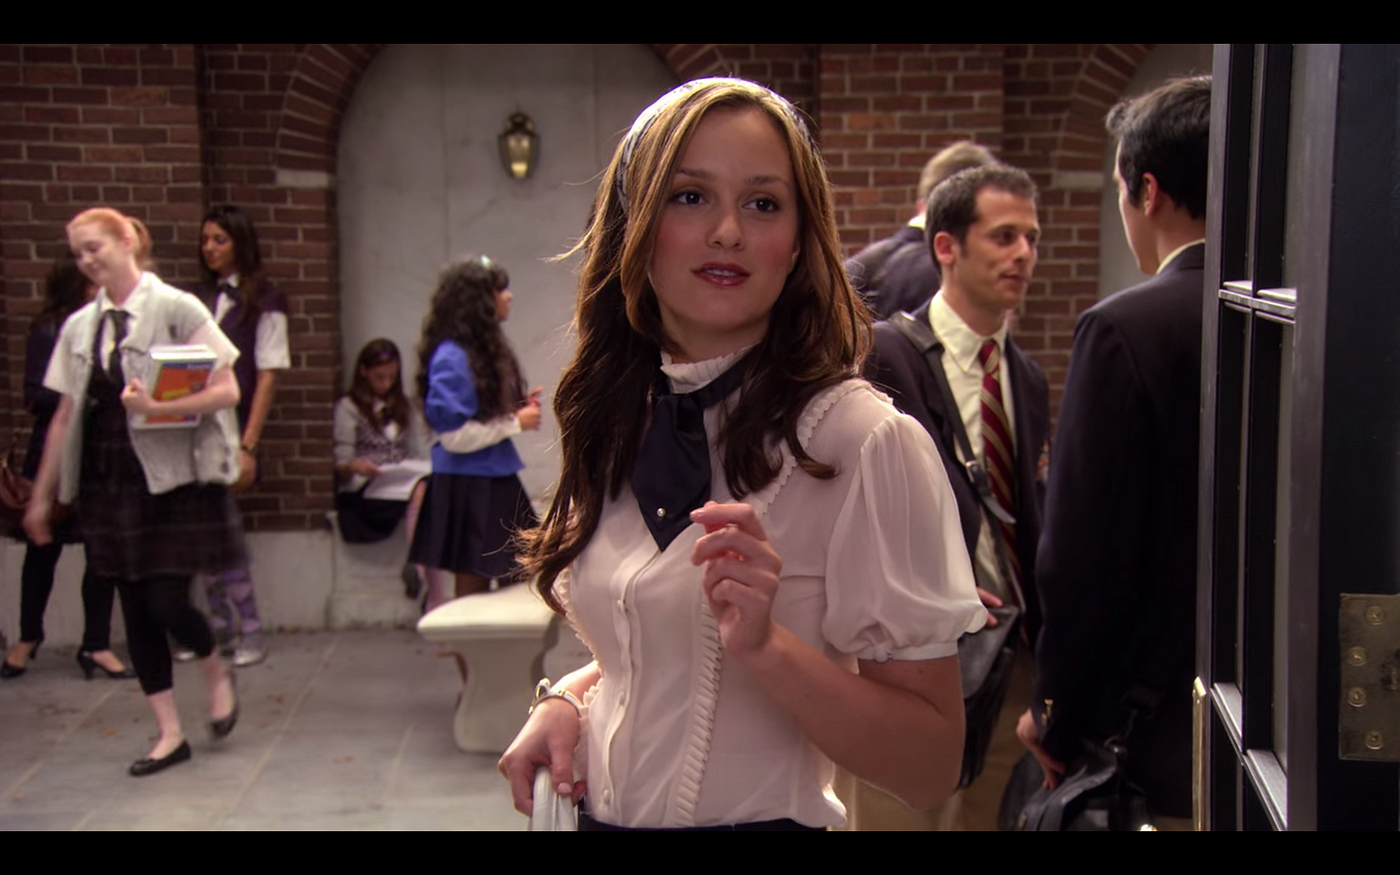 Justice for Blair Waldorf. Why Queen B Deserves More And We Do